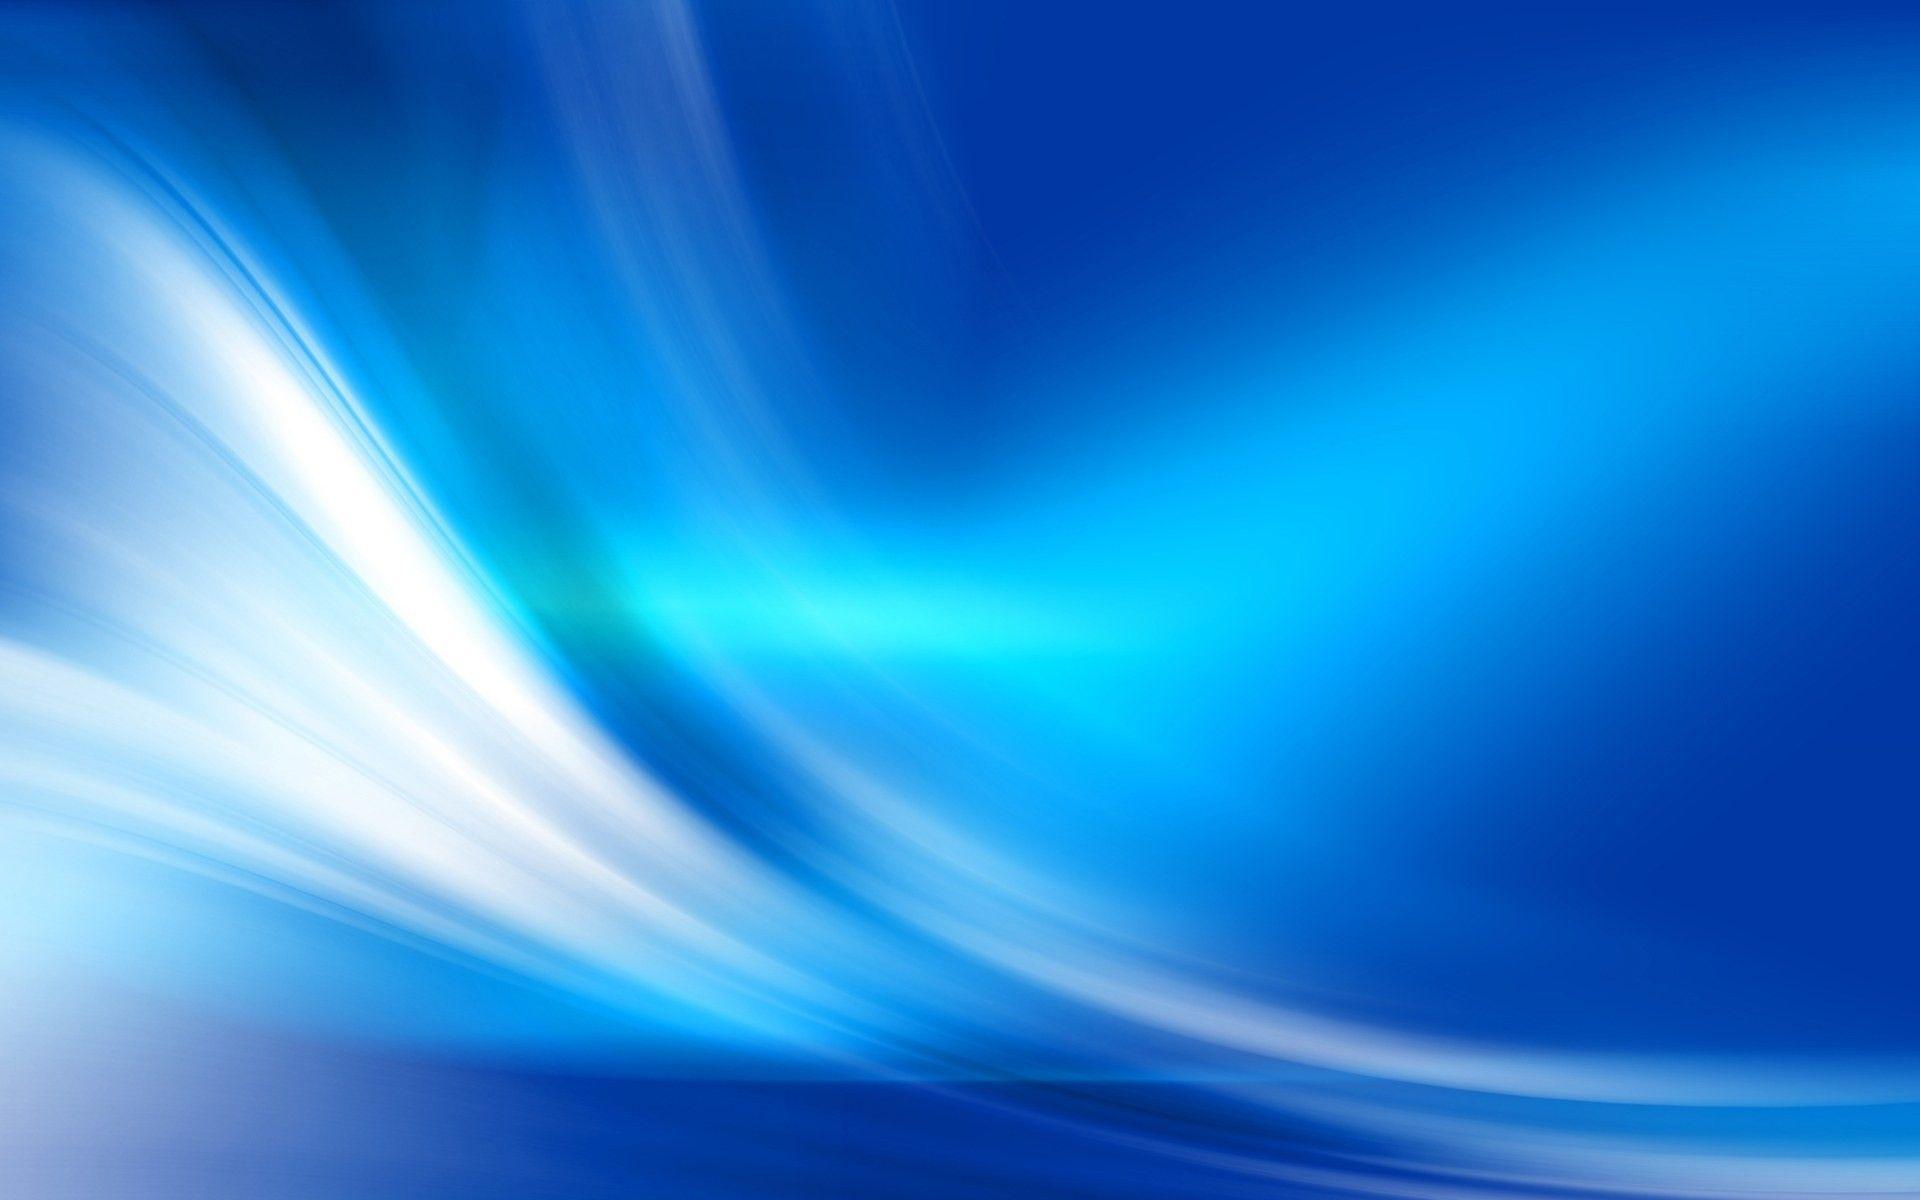 Cool Blue backgroundDownload free awesome background